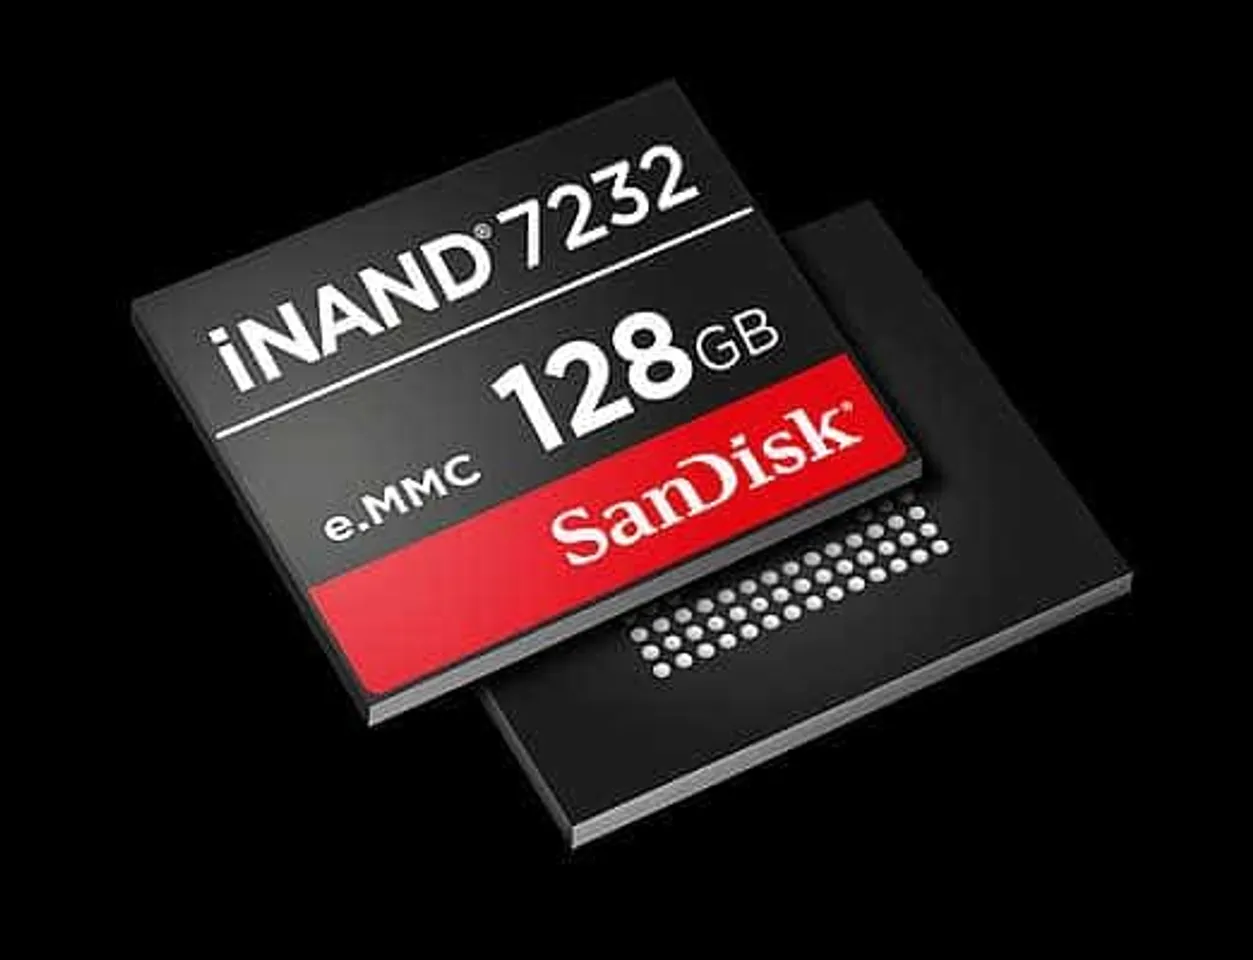 SanDisk launches new storage solution iNAND